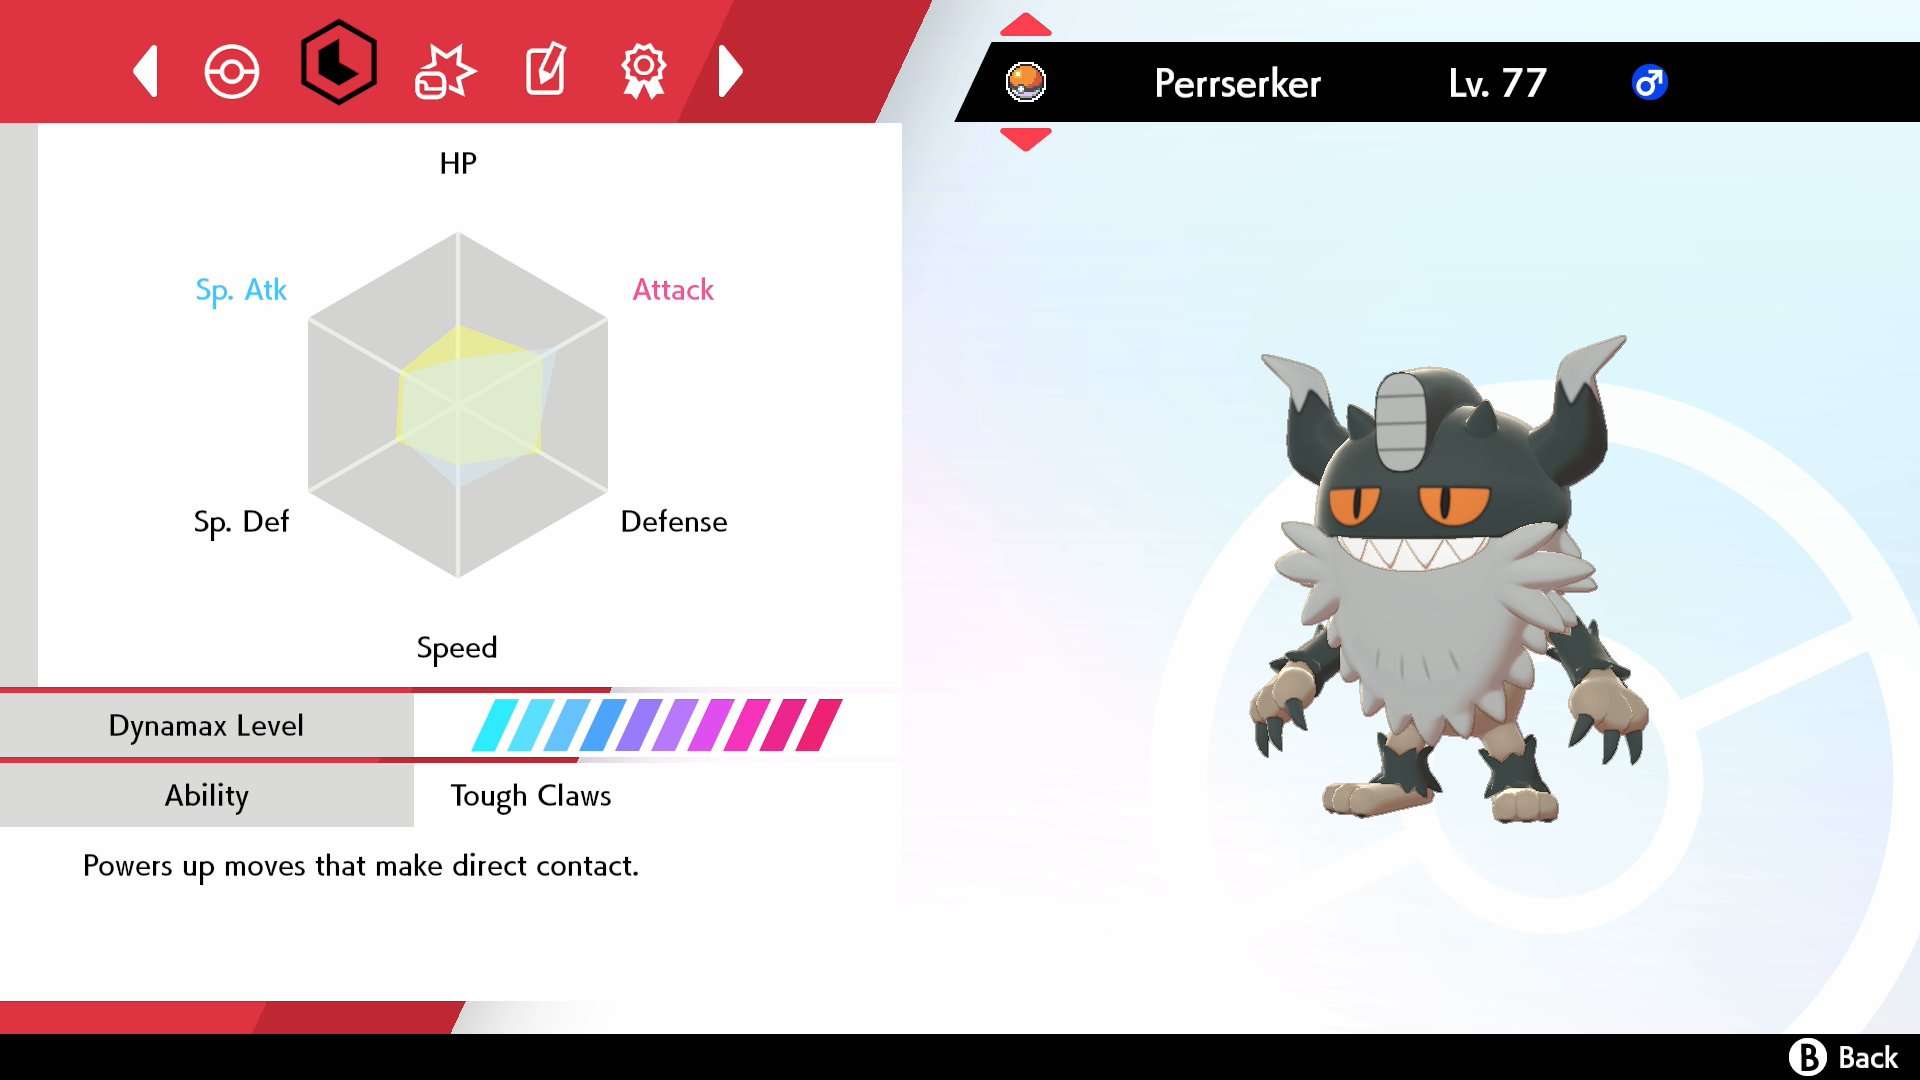 Pokemon Legends: Arceus EV guide - Effort Levels and how to raise